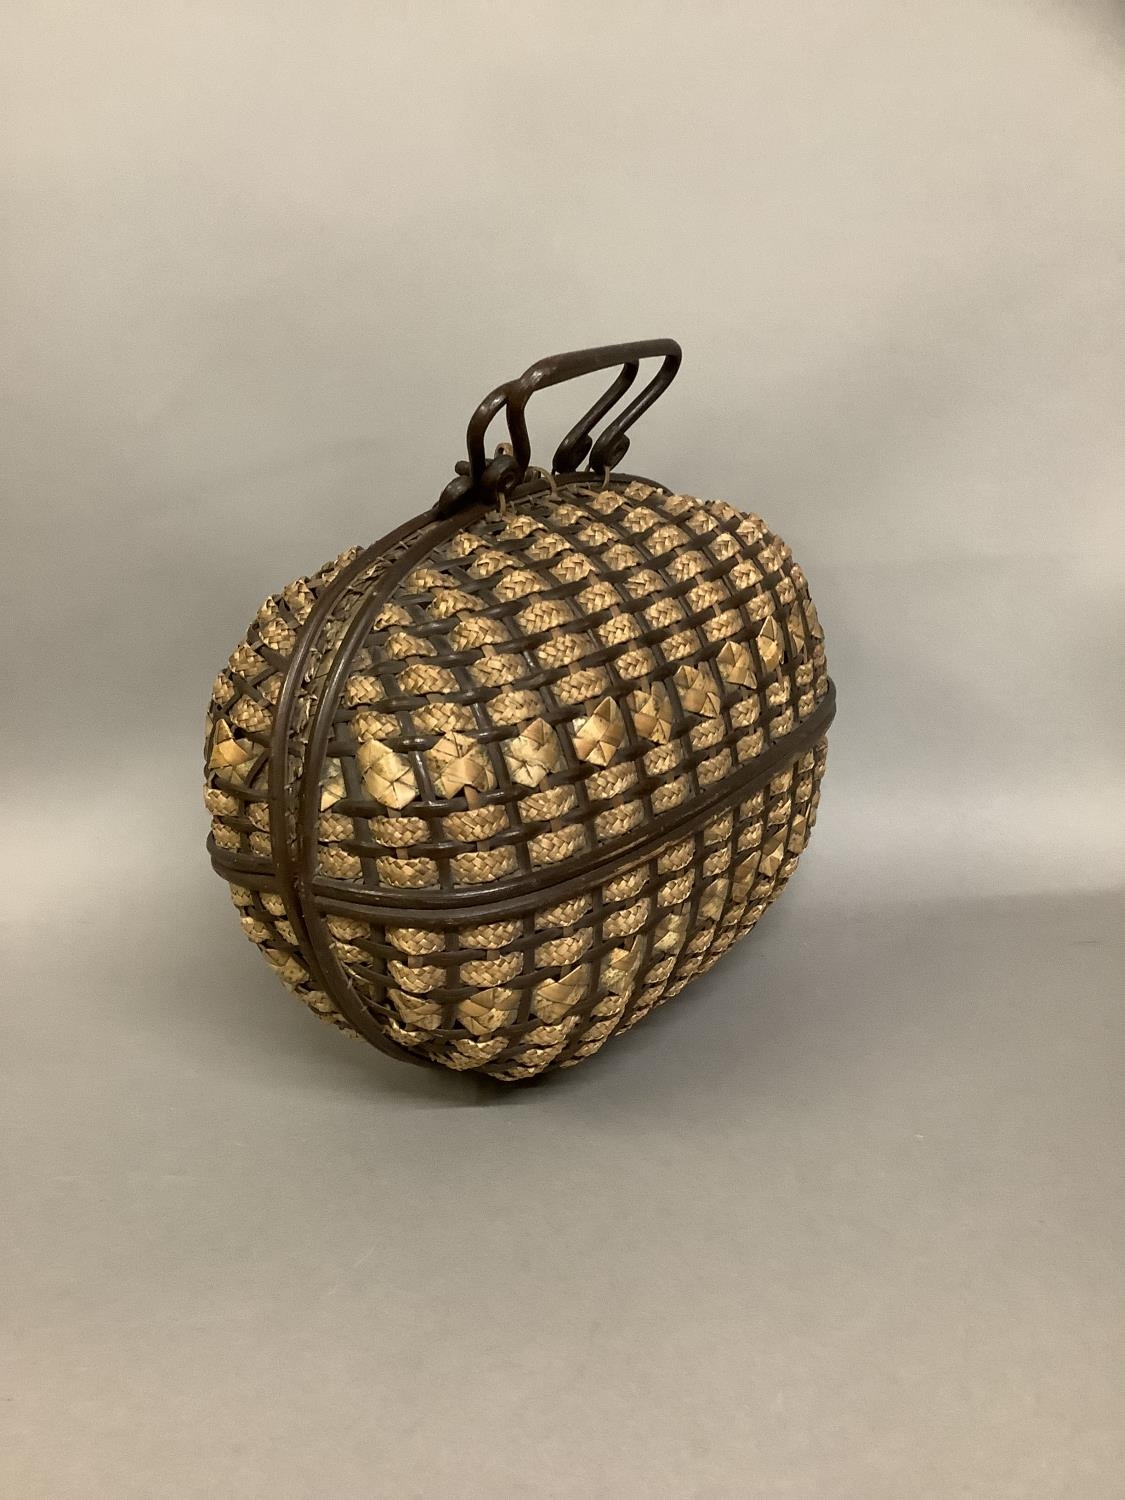 A Victorian lady’s honeycomb basket, in oval form, a work basket for sewing requisites, wood - Image 3 of 3